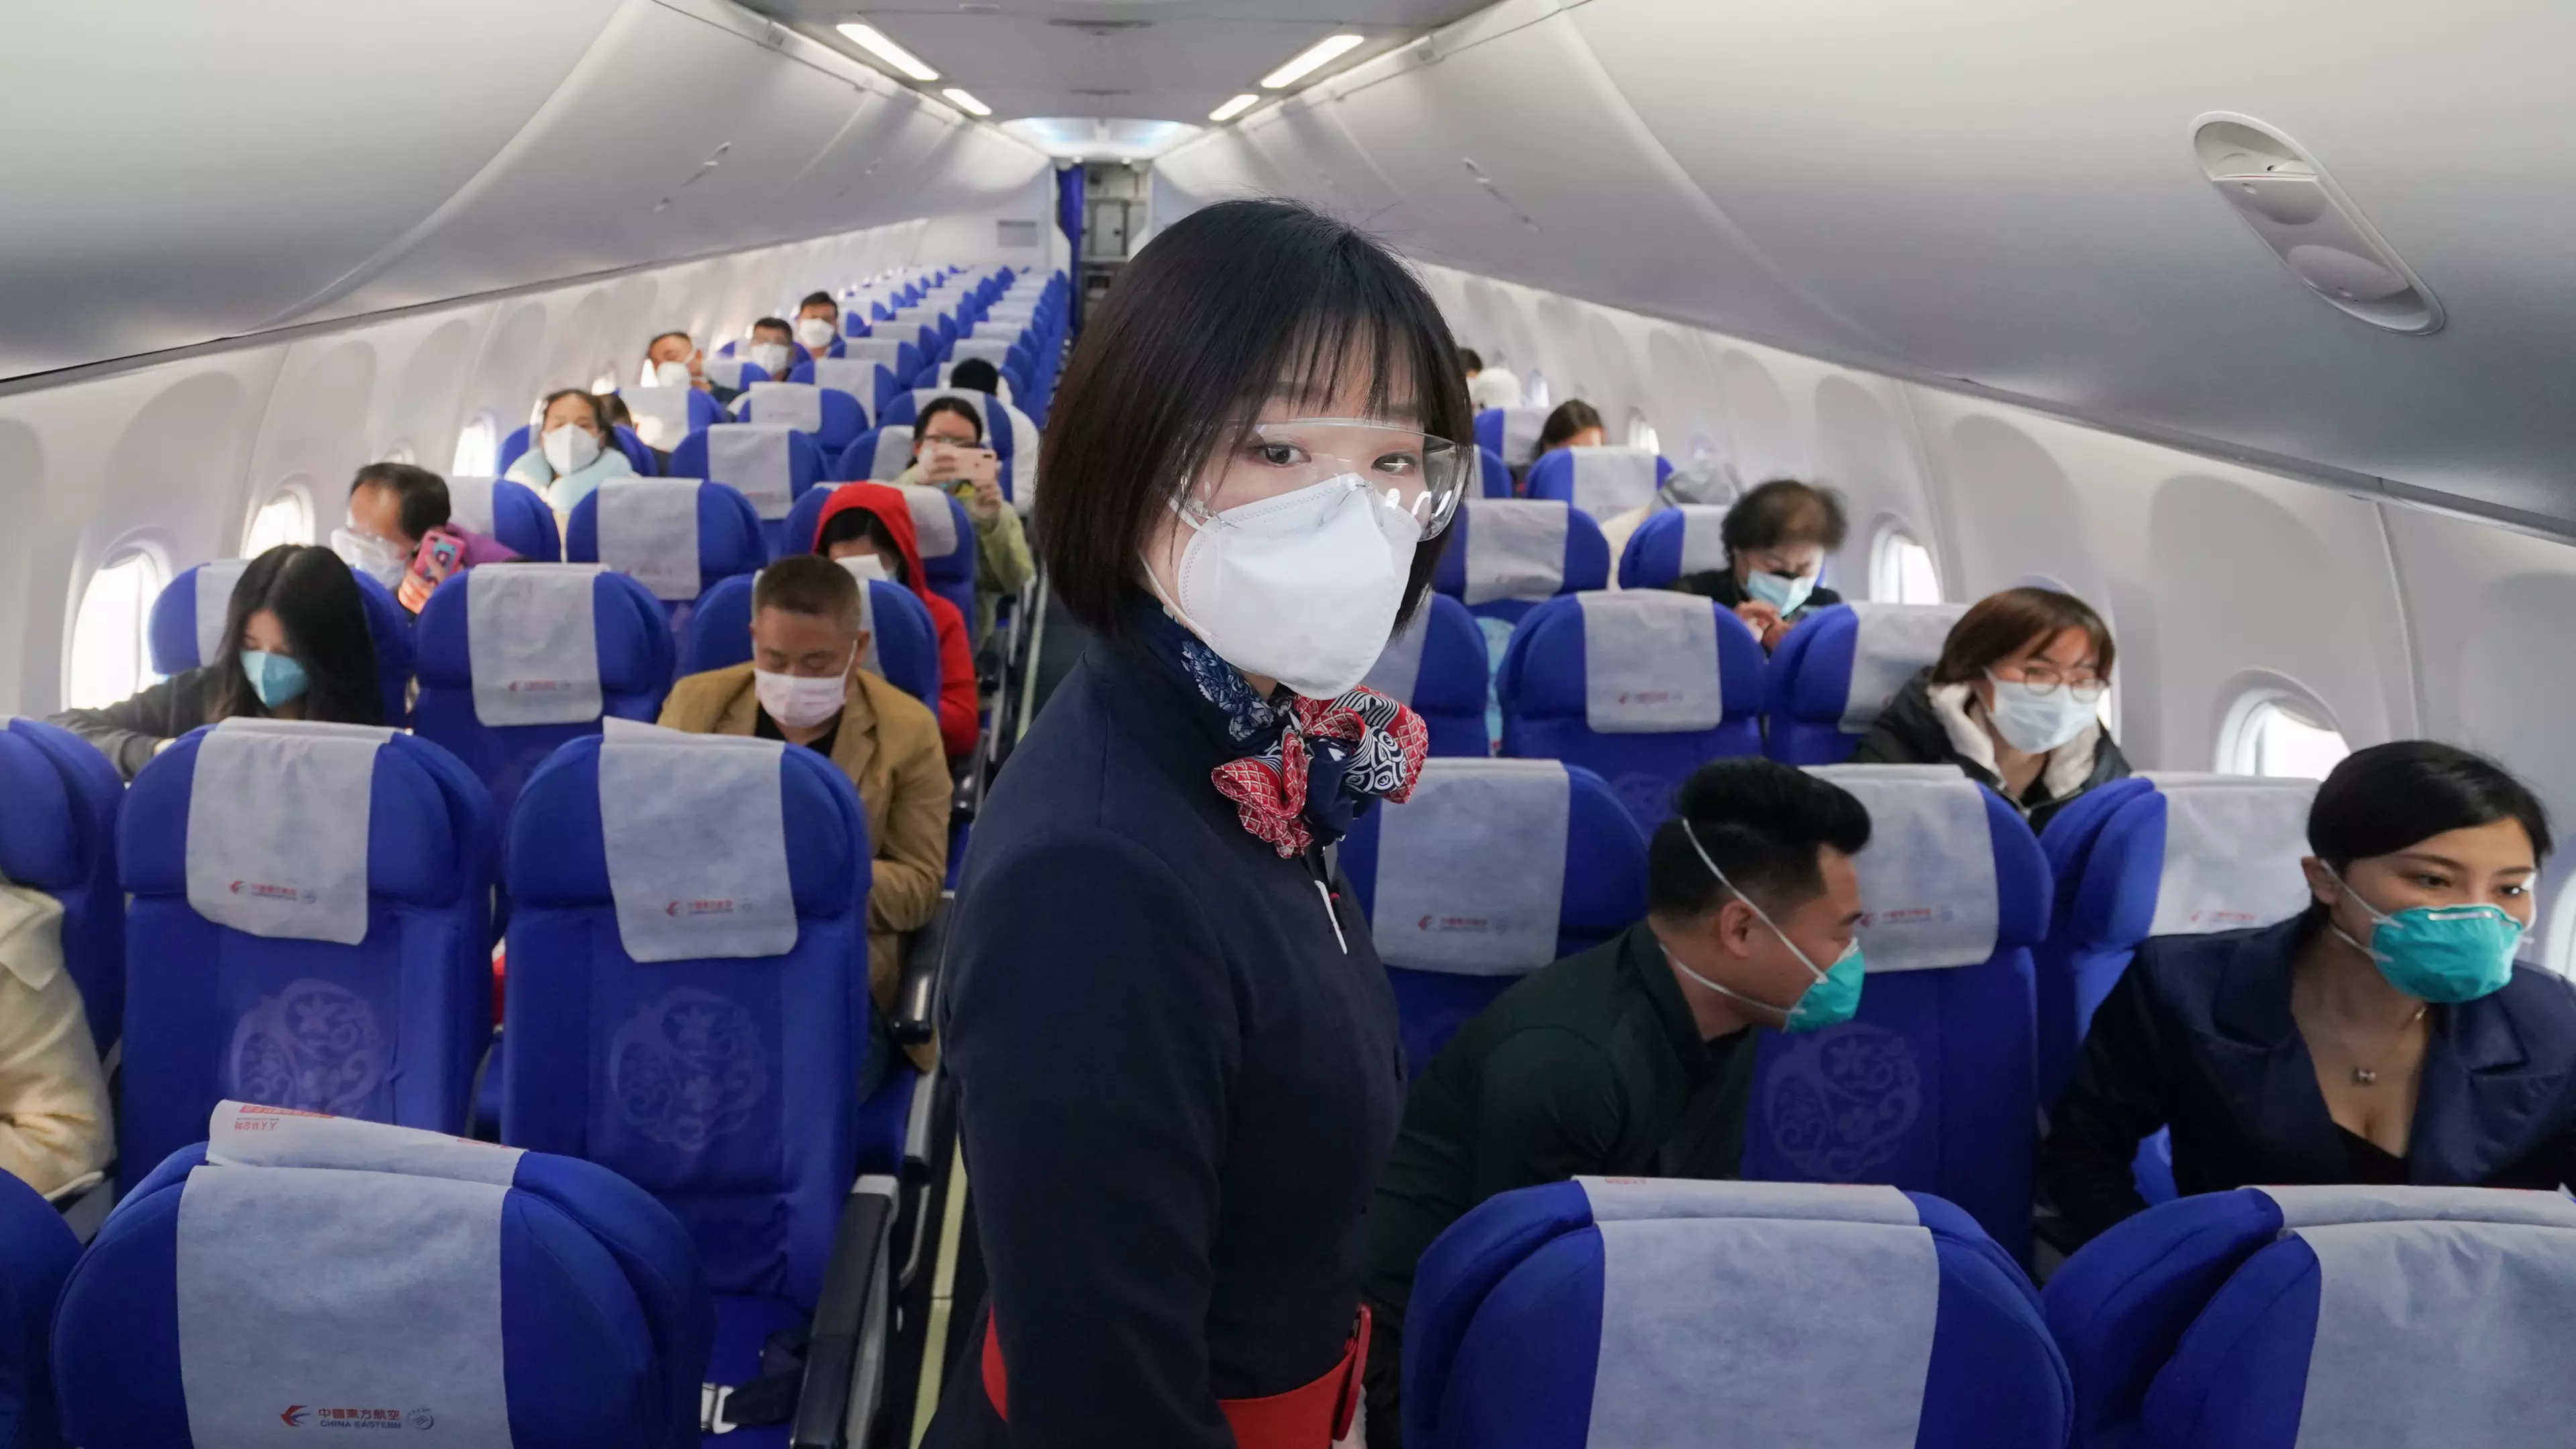 Cabin Crews In China Told To Wear Nappies To Reduce Covid-19 Risk